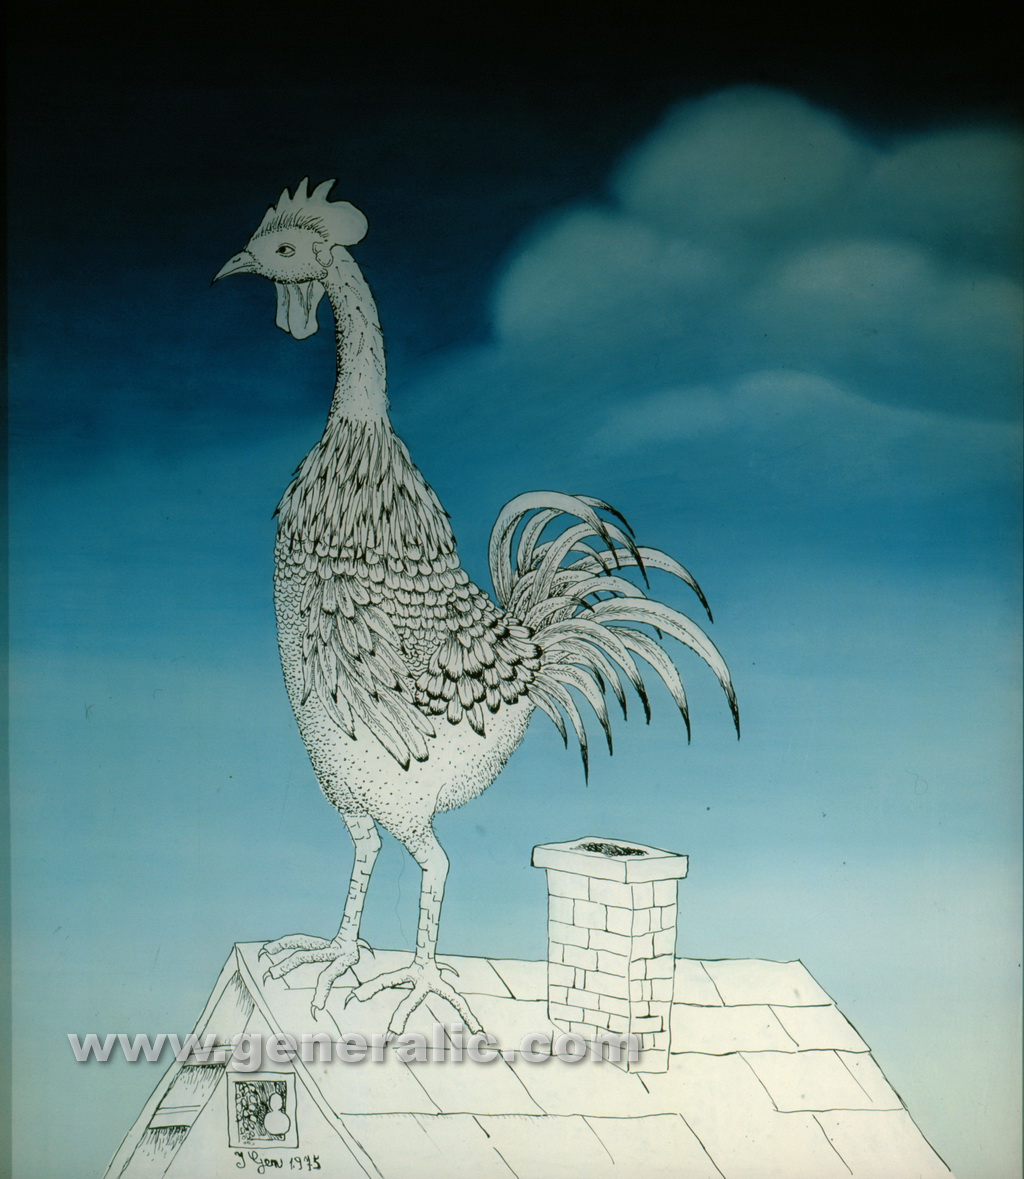 Ivan Generalic, 1975, White rooster, oil on glass